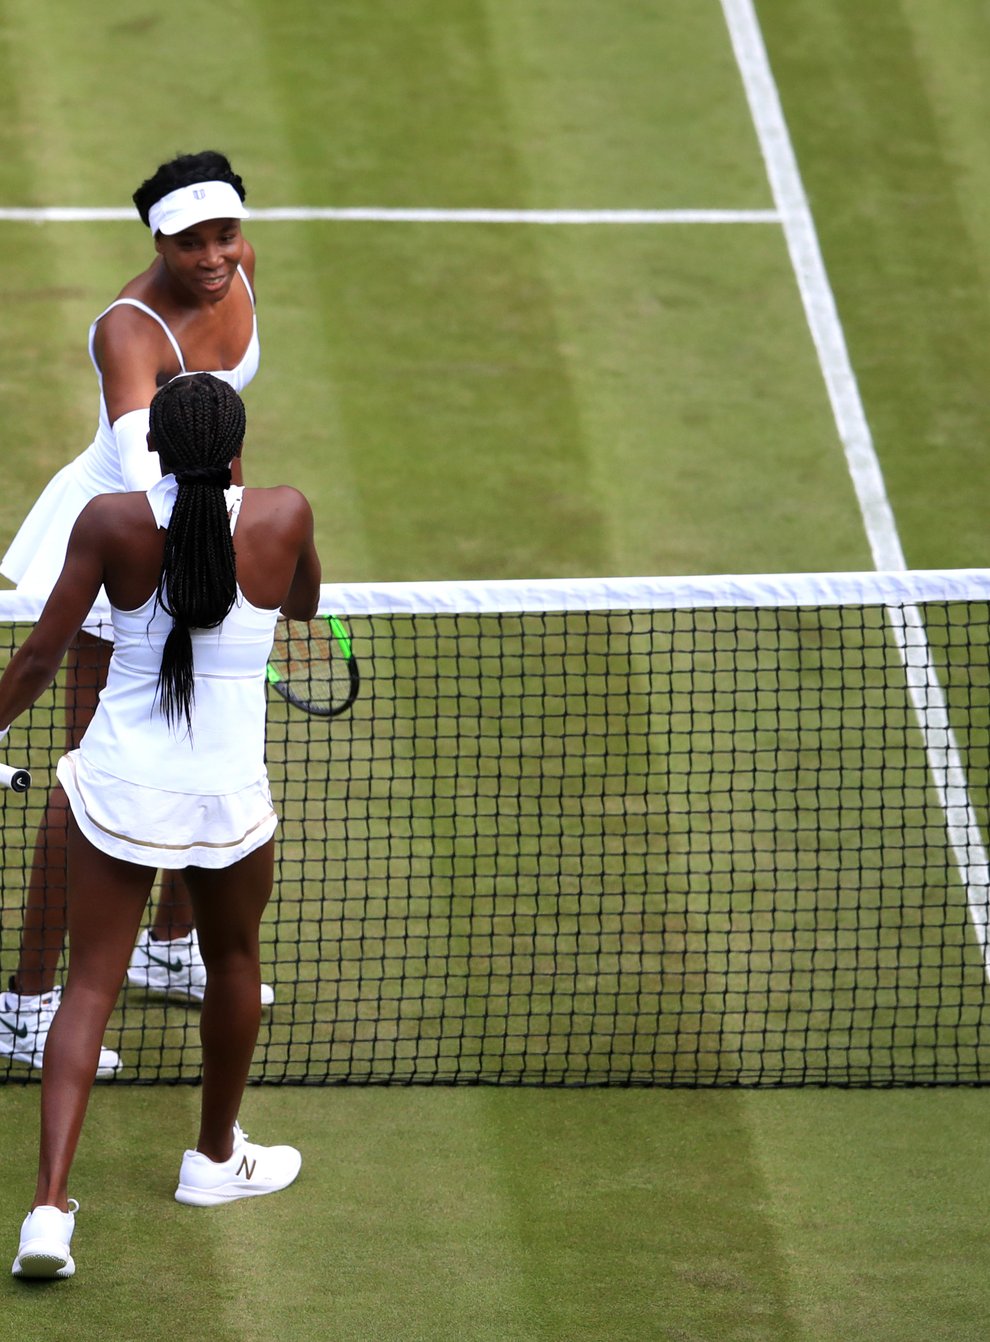 Coco Gauff and Venus Williams made headlines in their epic Wimbledon first round match in 2019 (PA Images)